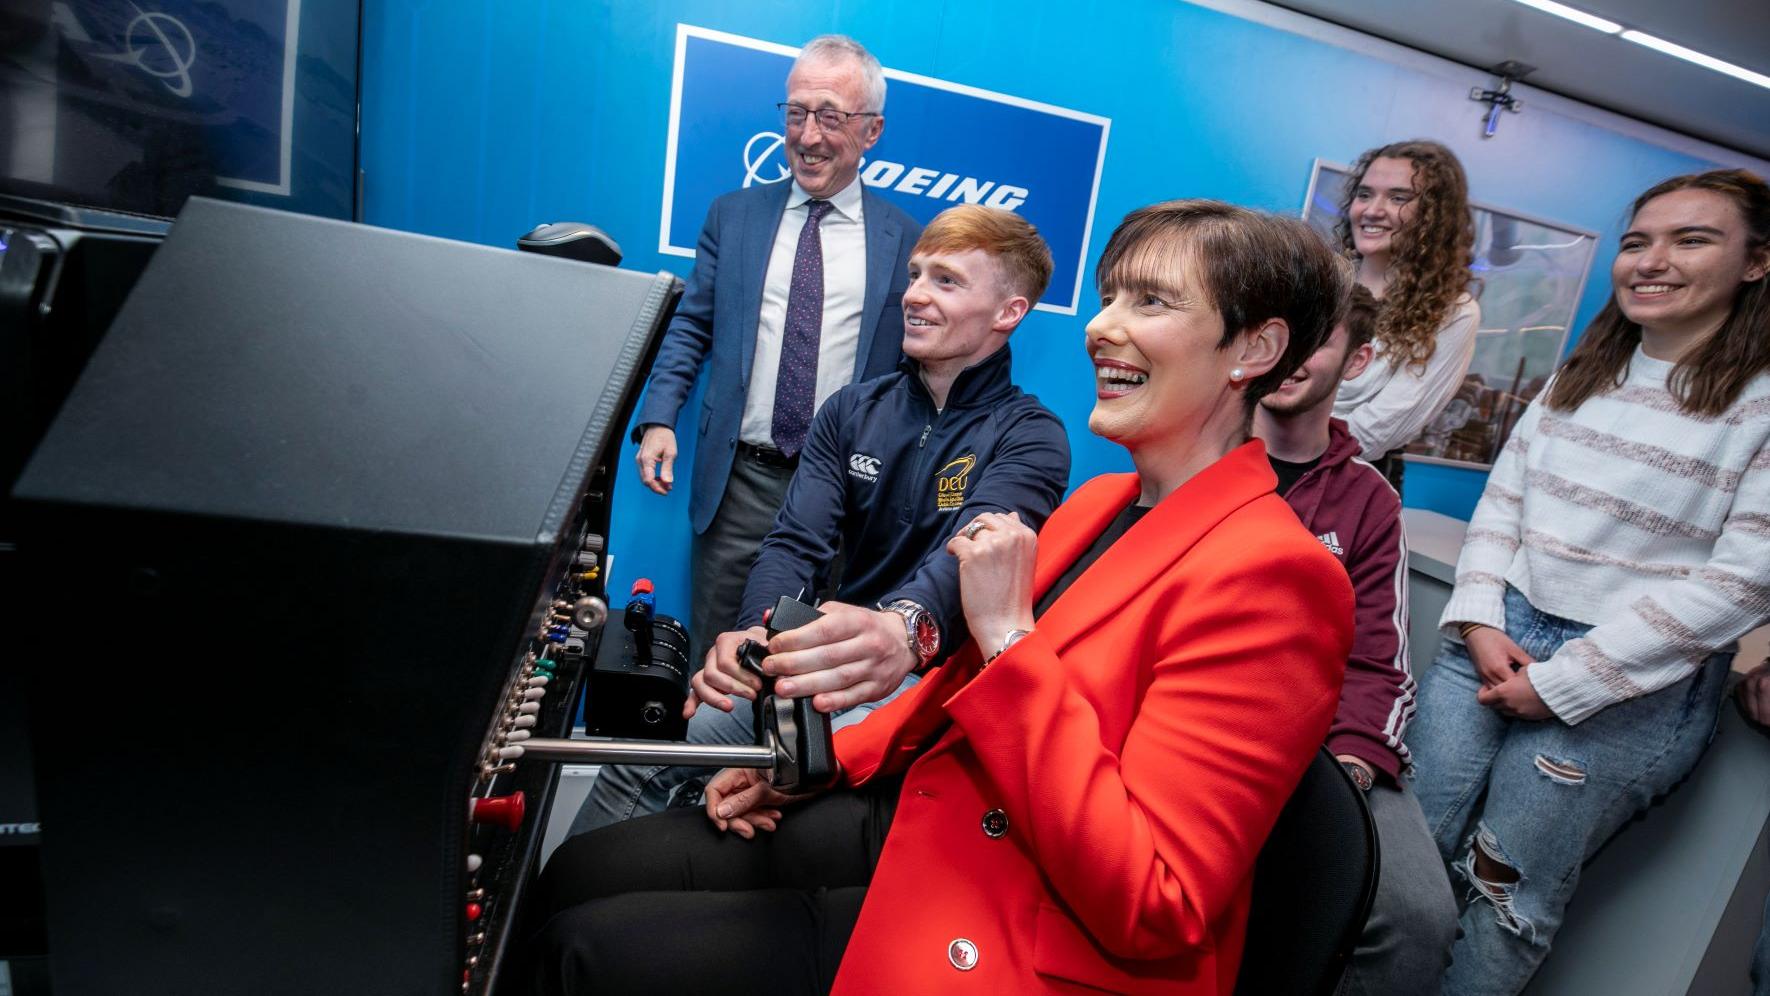 Minister Norma Foley with students and Sir Martin Donnelly, president of Boeing Europe and managing director of Boeing in the UK and Ireland.